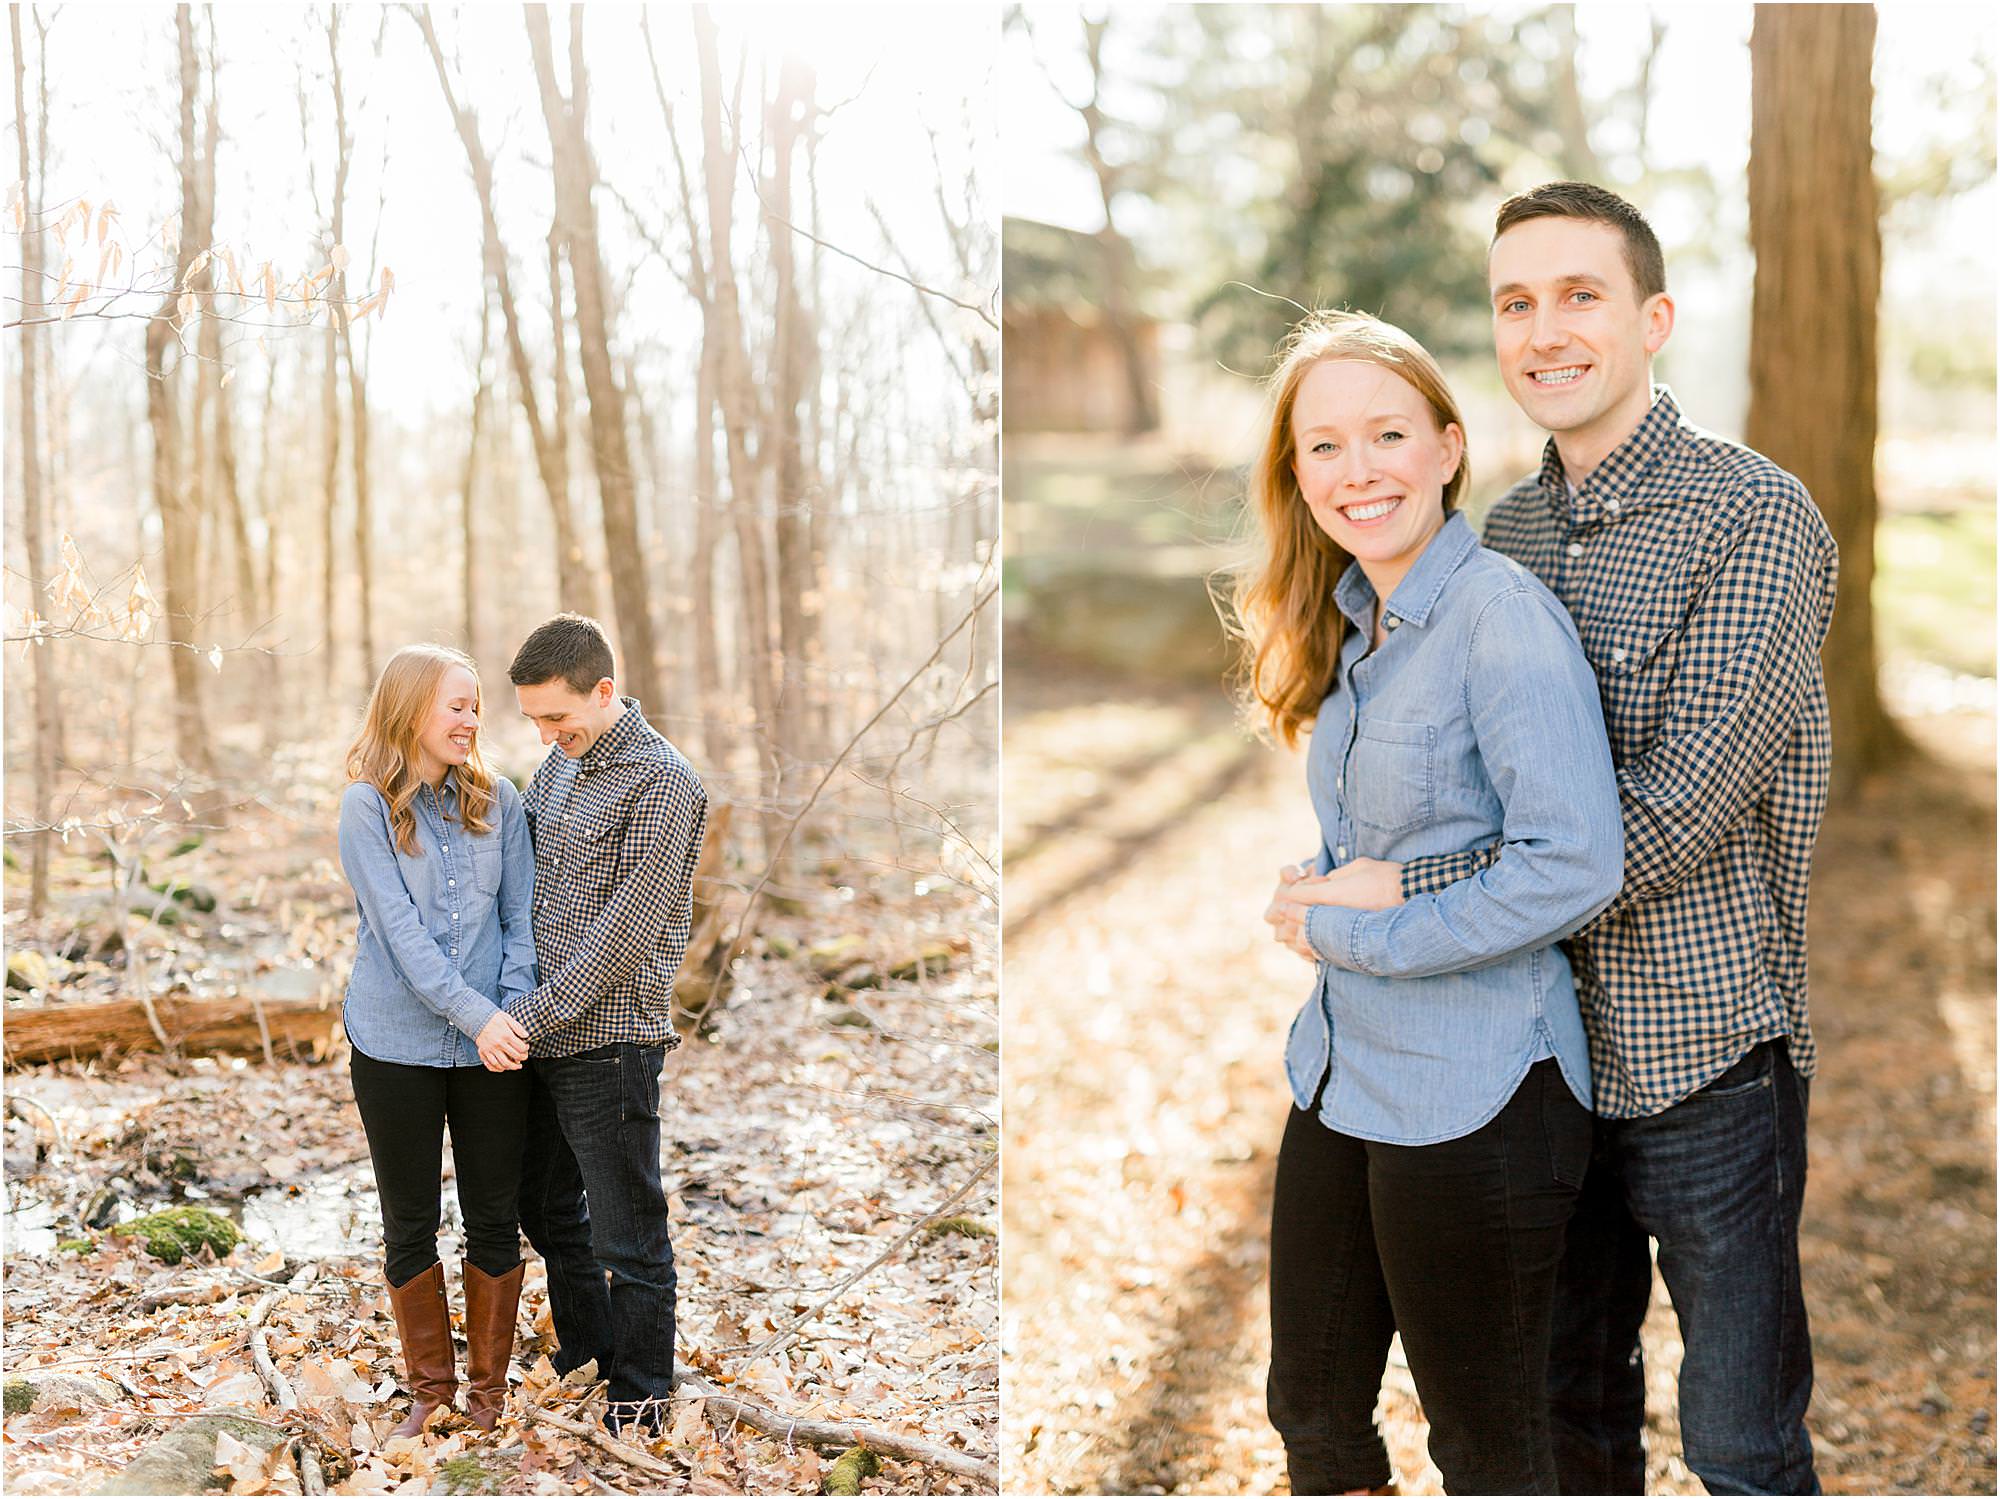 Rustic Chatfield Hollow Engagement by Long Island and Connecticut Wedding Photographers Daphne and Dean